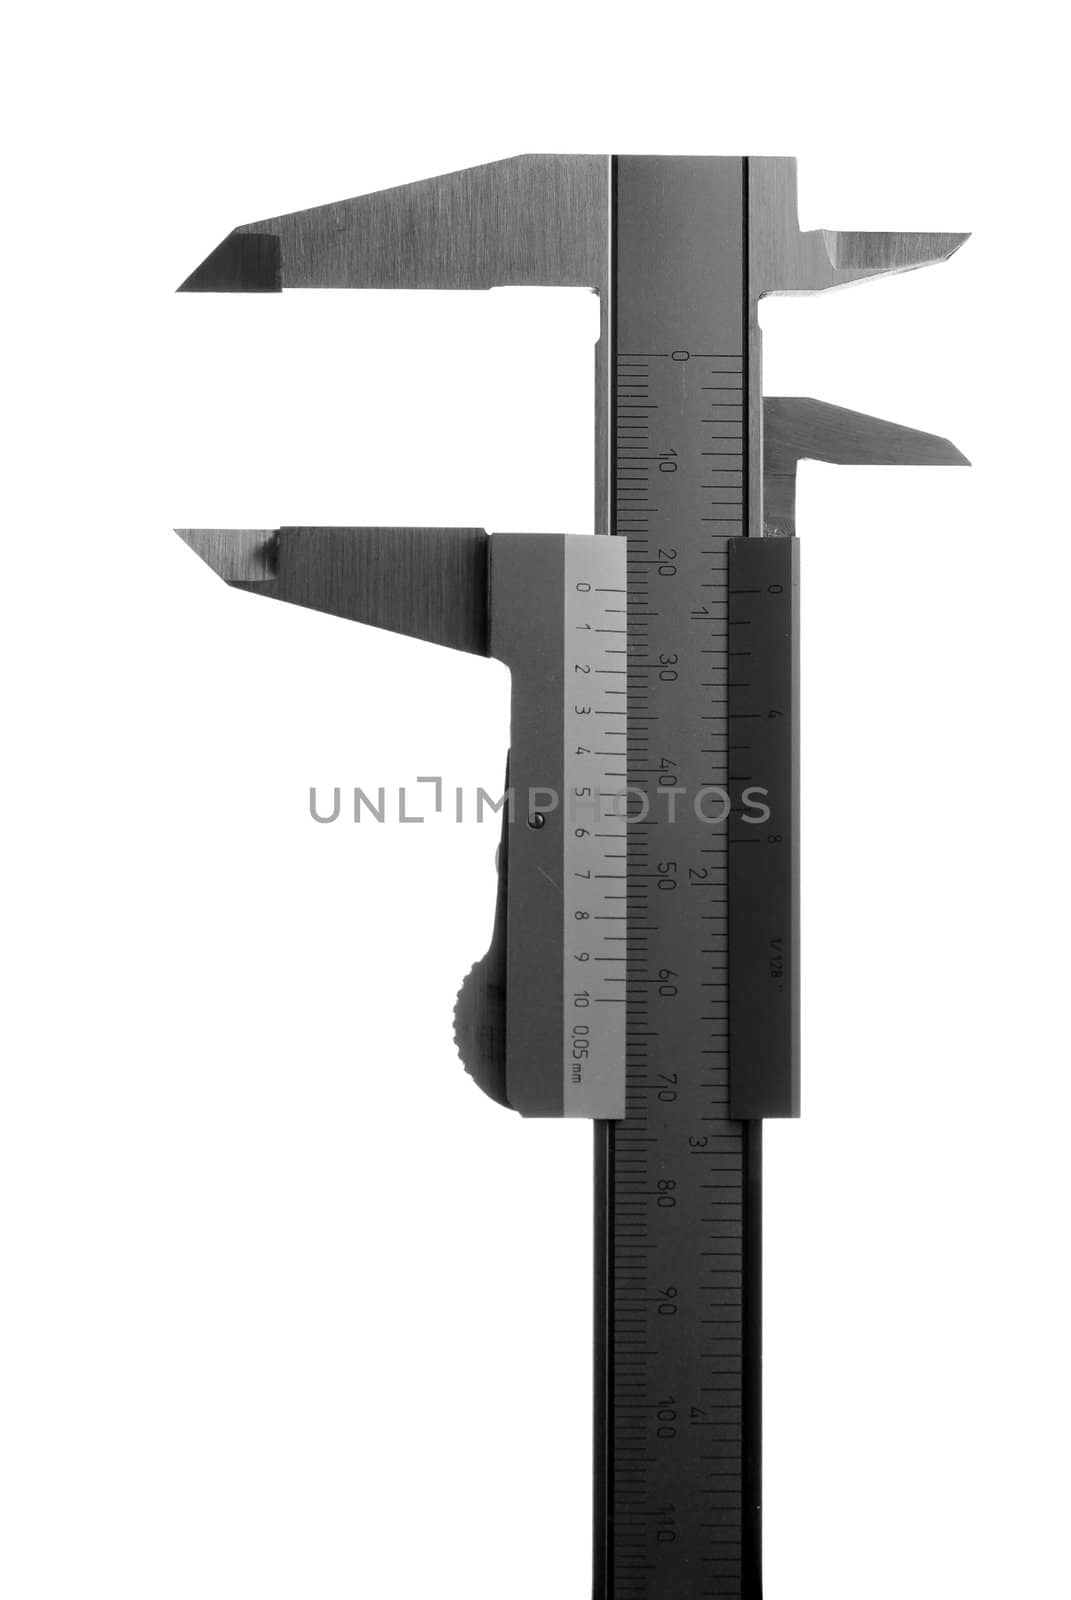 Calliper measuring tool isolated over white background